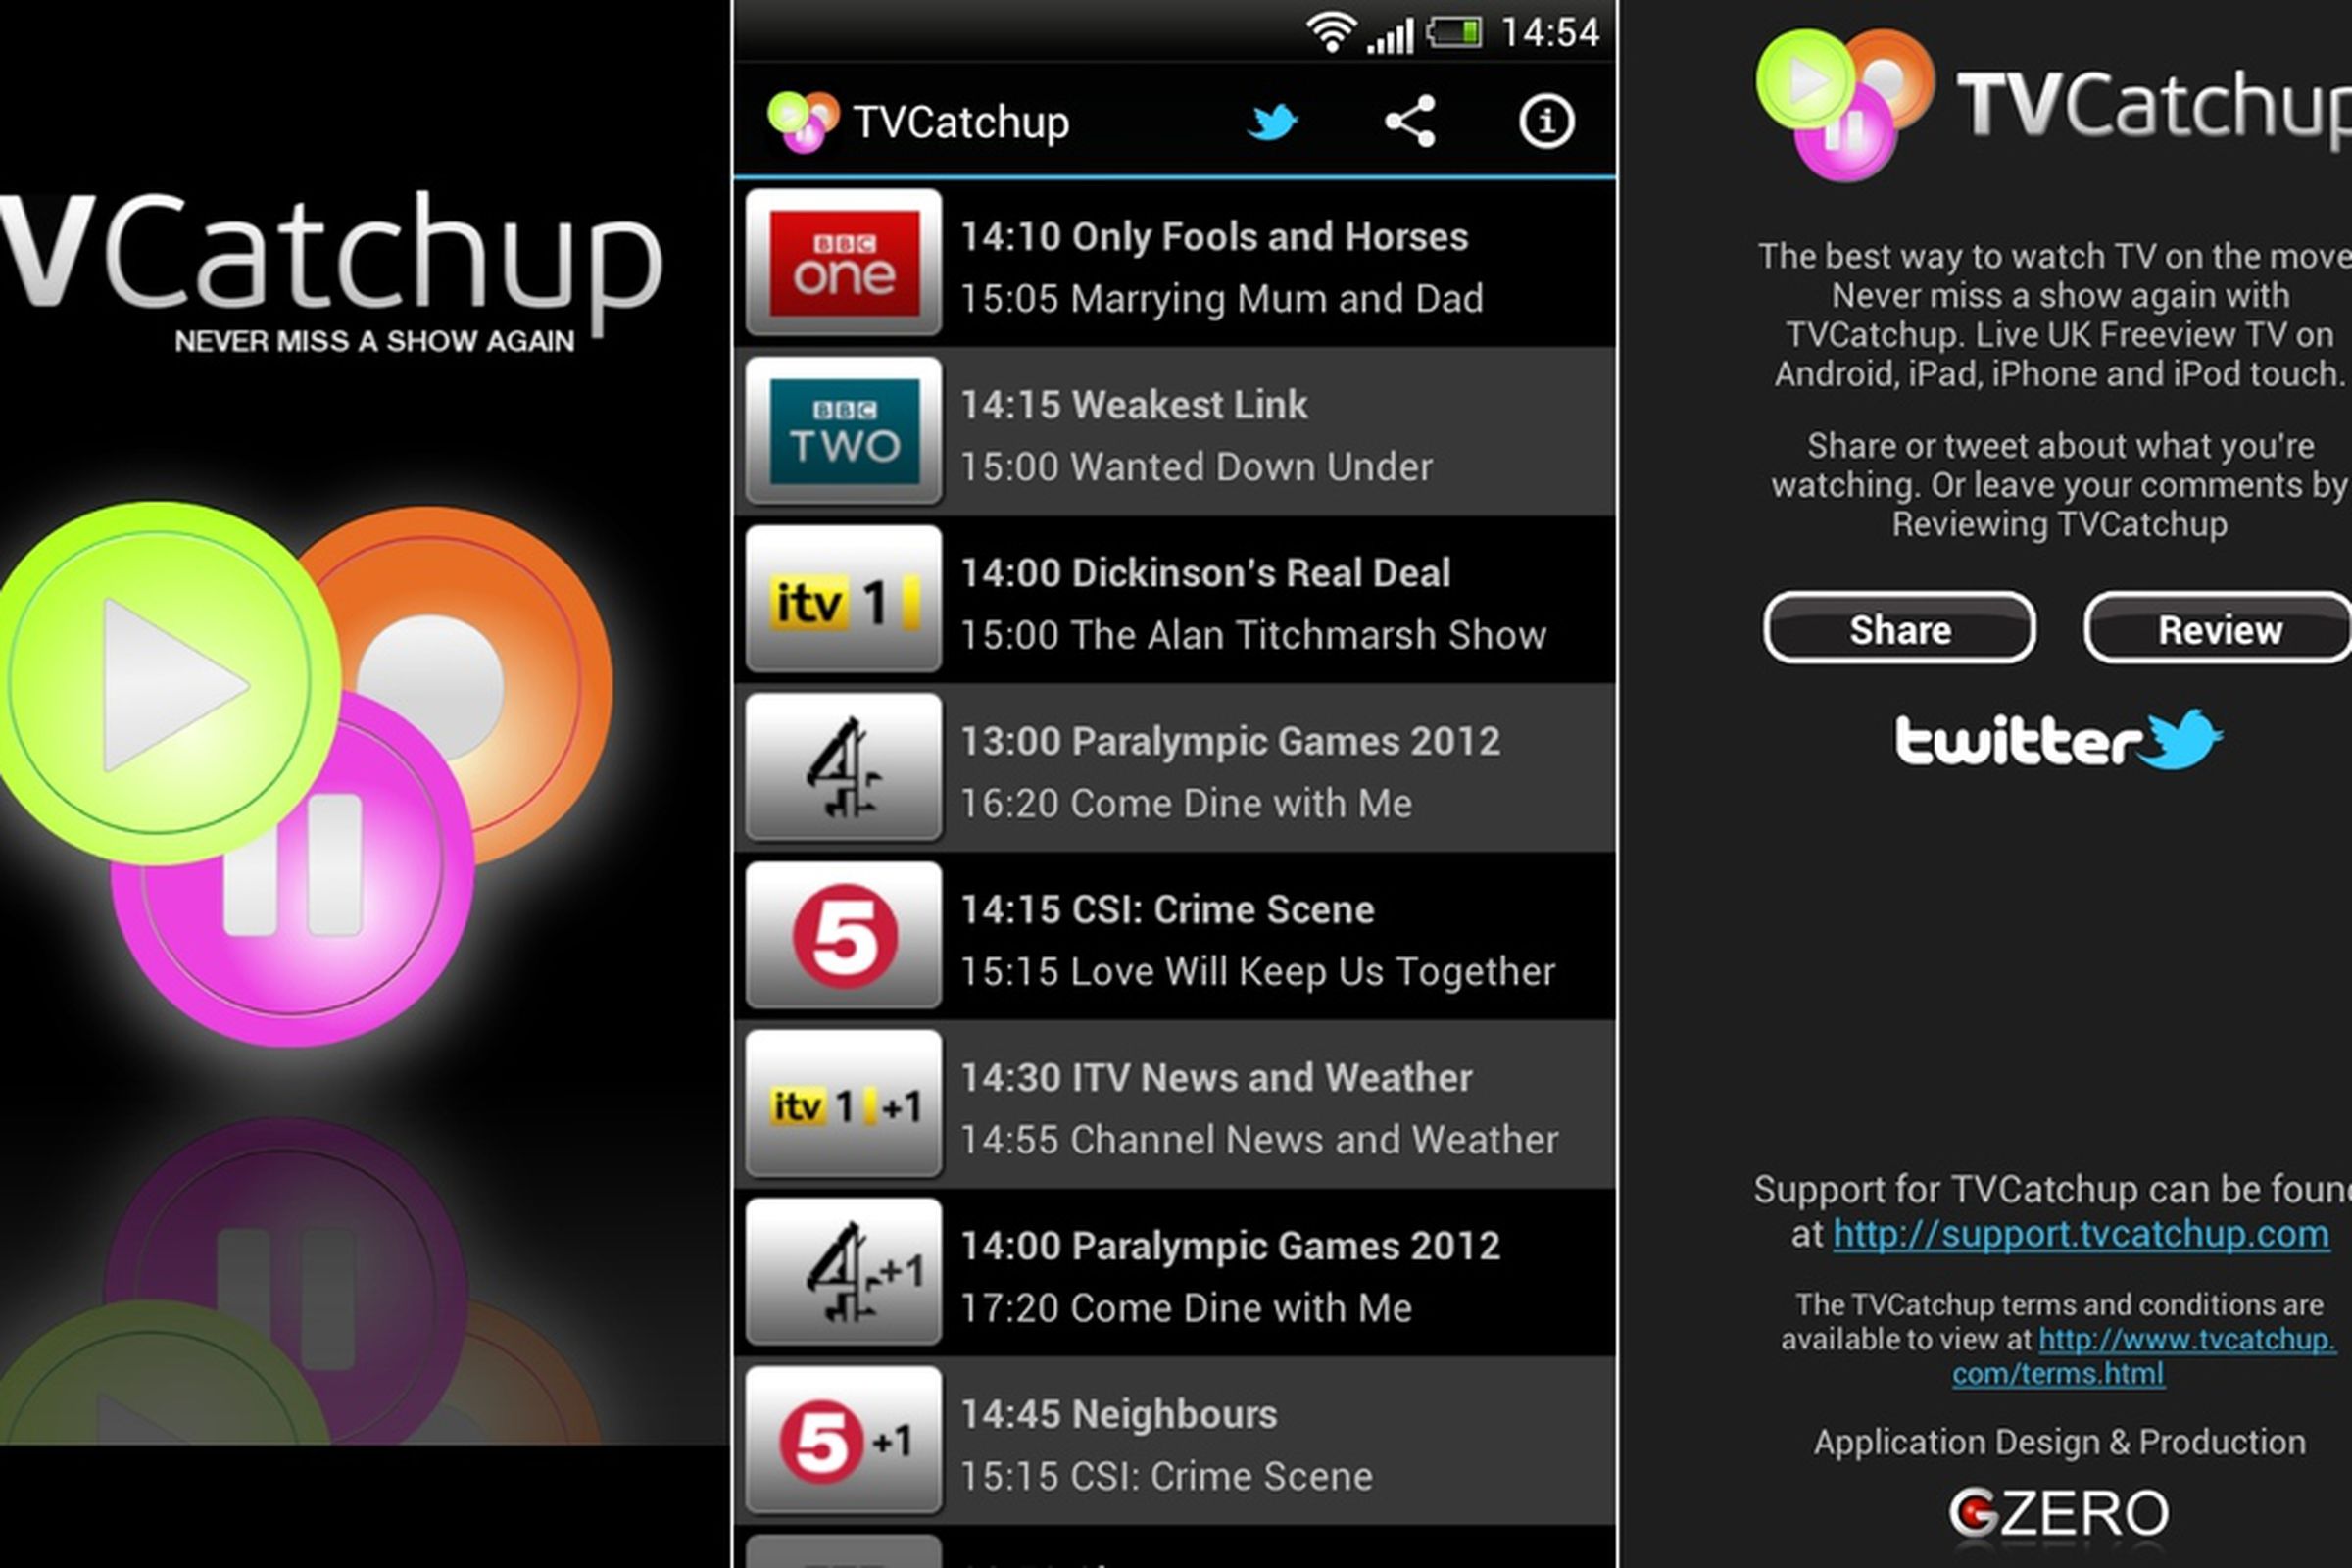 TVCatchup Android app